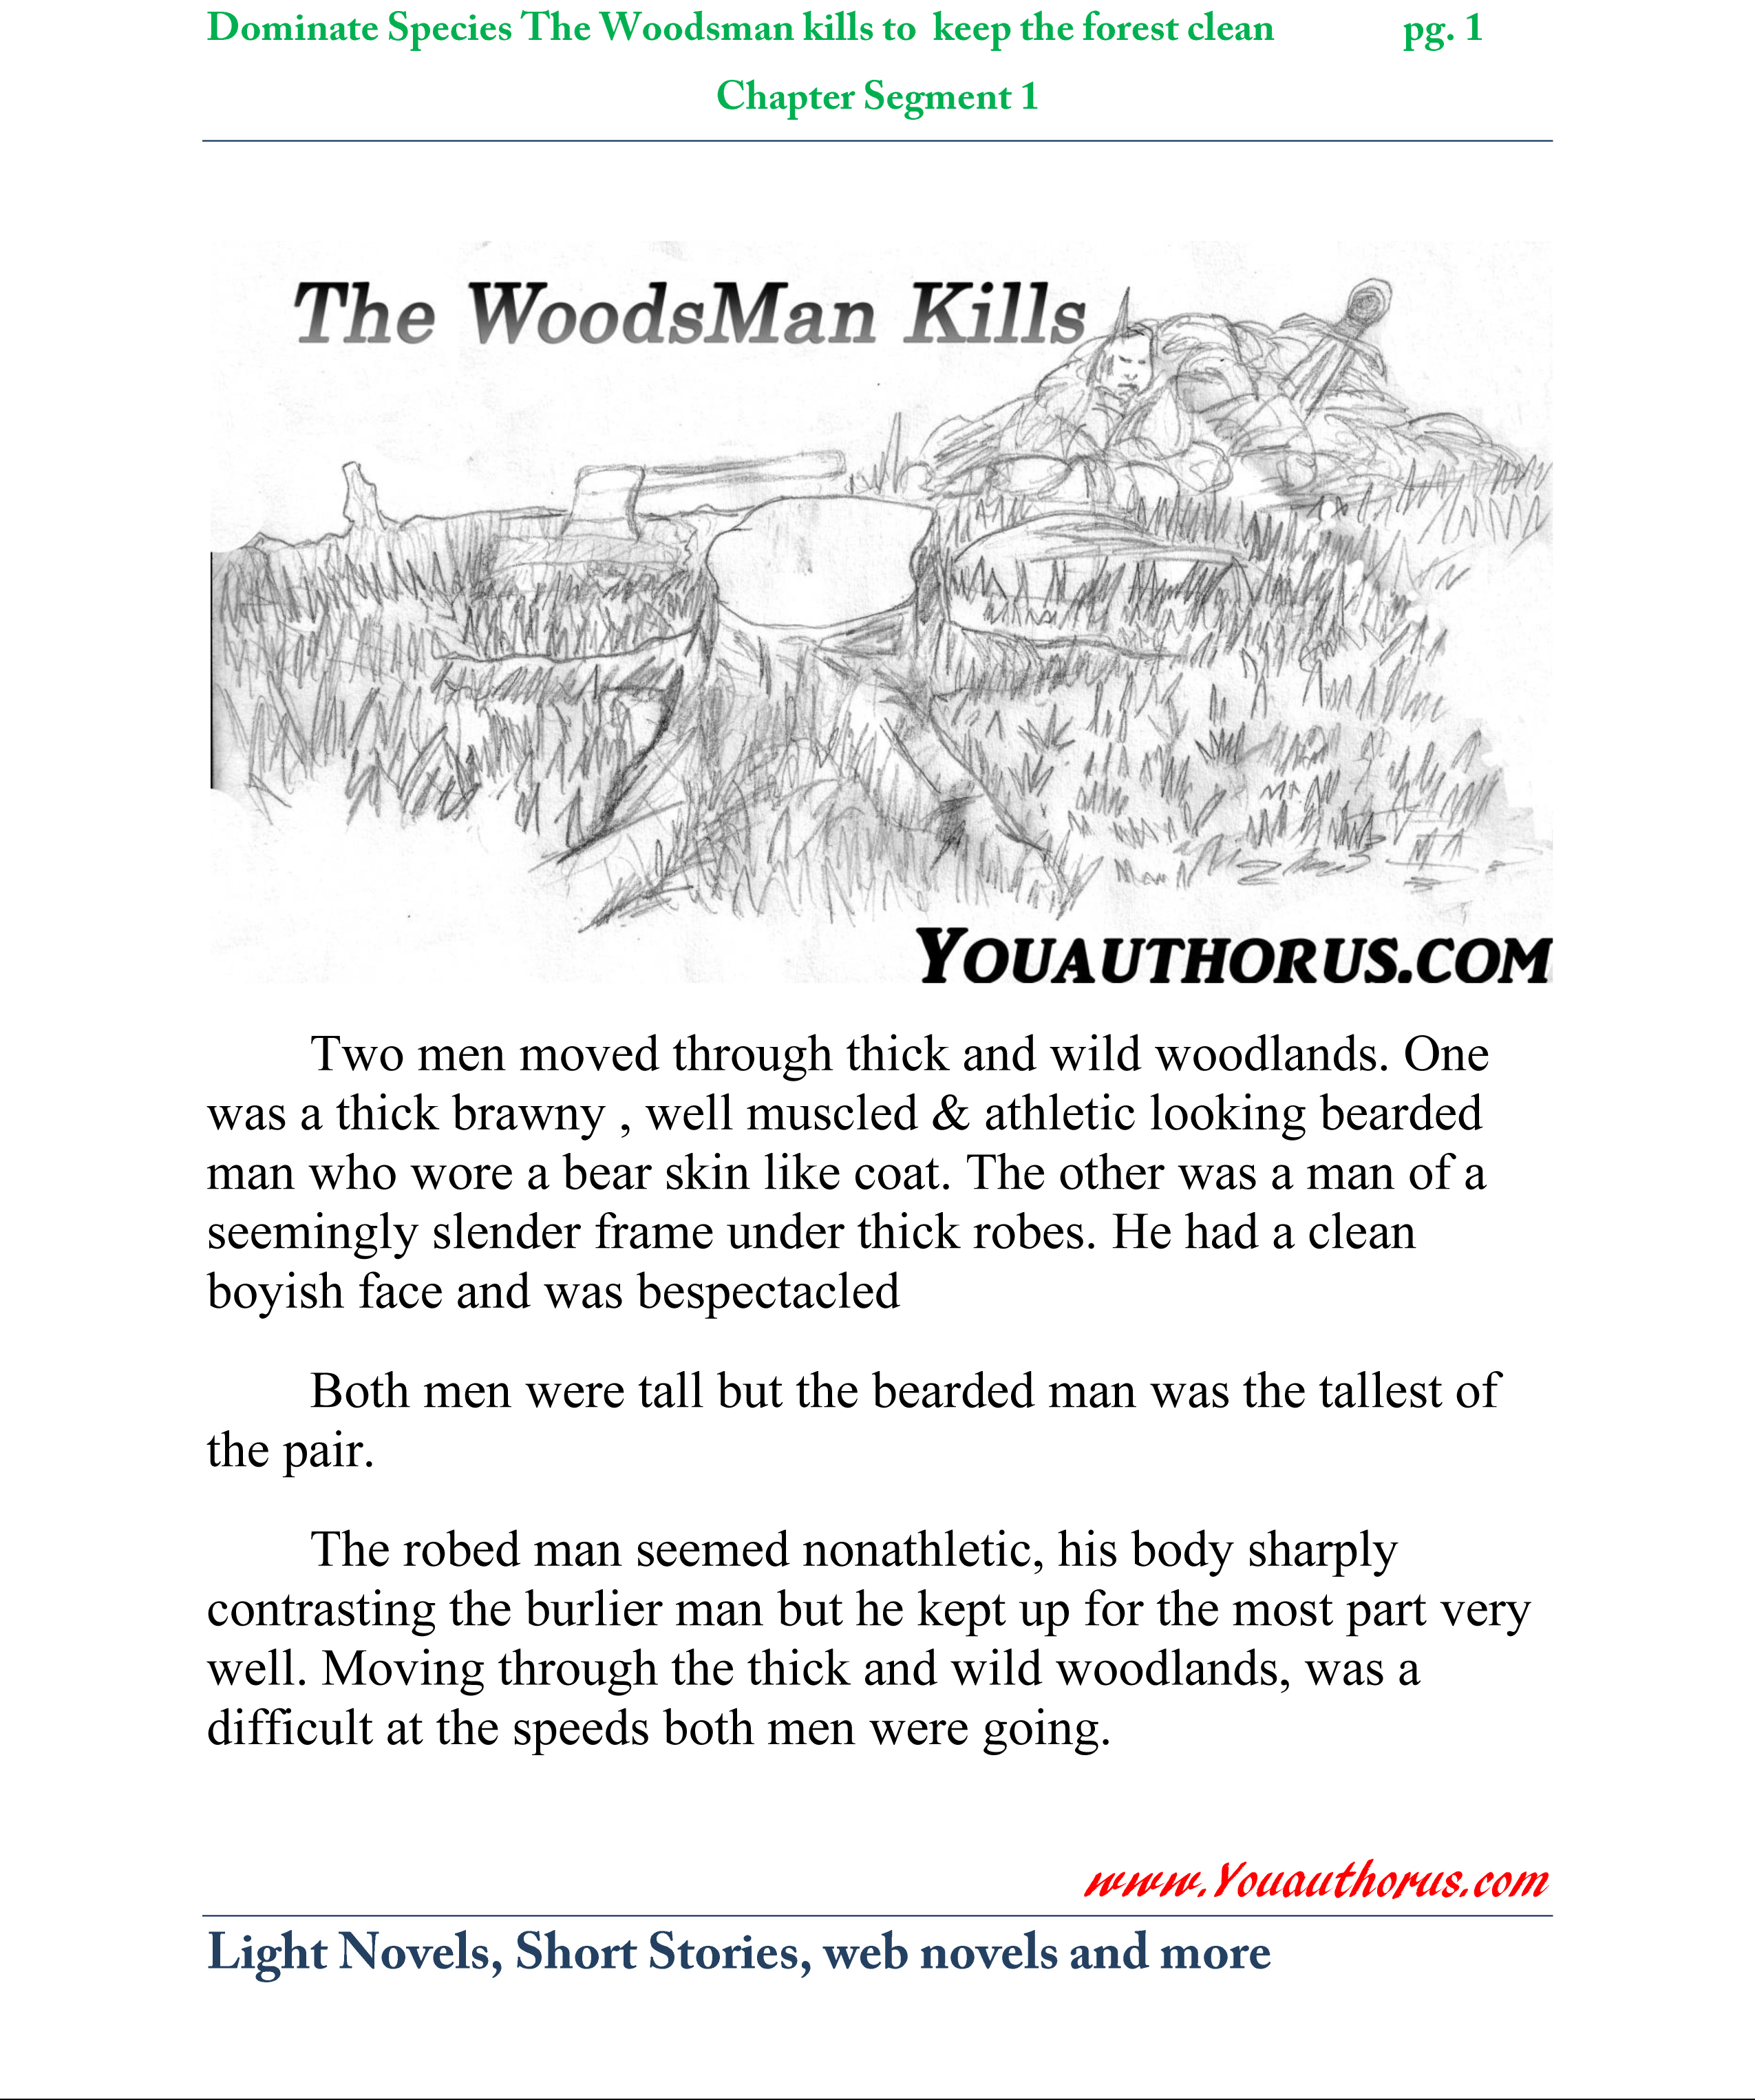 dominate species the woodsman kills to to keep the forest clean-1 copy